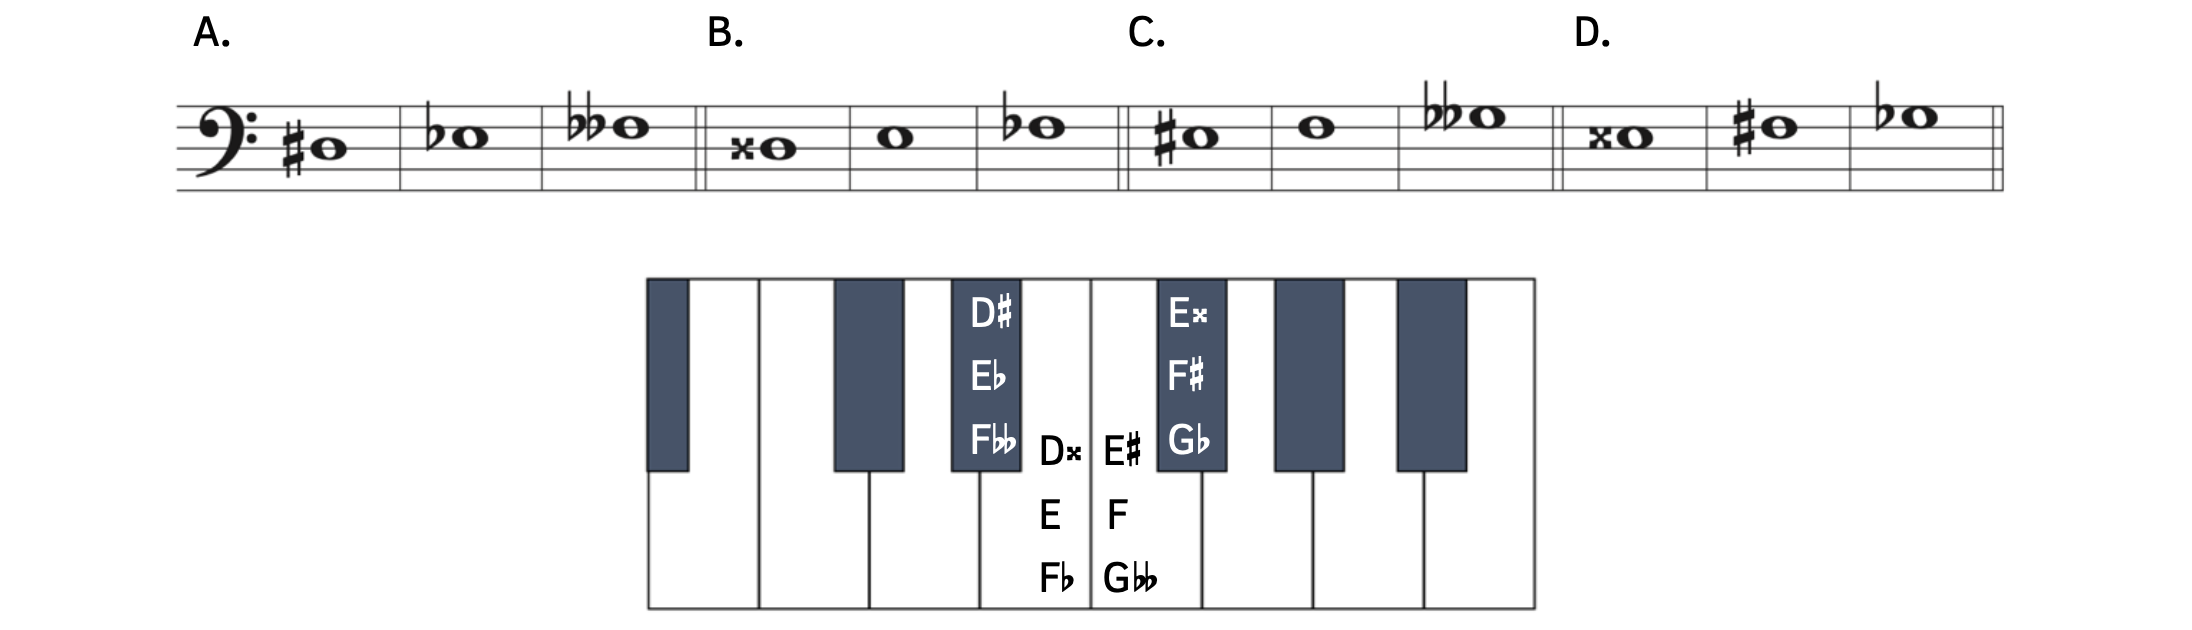 Different examples of enharmonic equivalents. Example A shows that D-sharp, E-flat, and F-double flat are enharmonically equivalent. Example B shows that D-double sharp, E, and F-flat are enharmonic equivalents. Example C shows that E-sharp, F, and G-double flat are enharmonically equivalent. Example D shows that E-double sharp, F-sharp, and G-flat are enharmonic equivalents. The pitches are all shown on a piano keyboard.